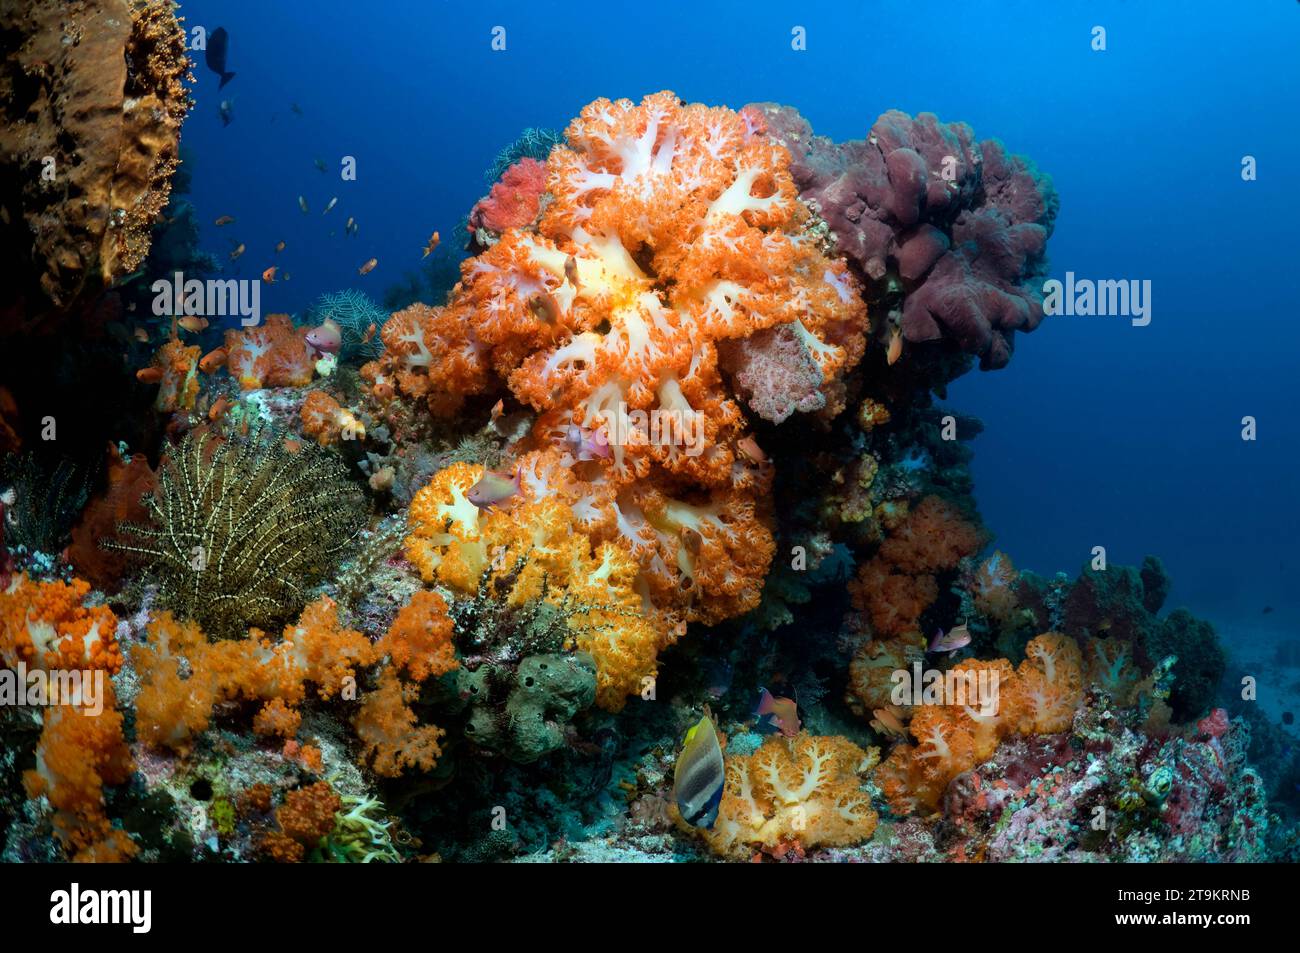 Coral reef scenery with soft corals (Scleronephthya sp.).  Komodo National Park, Indonesia. Stock Photo